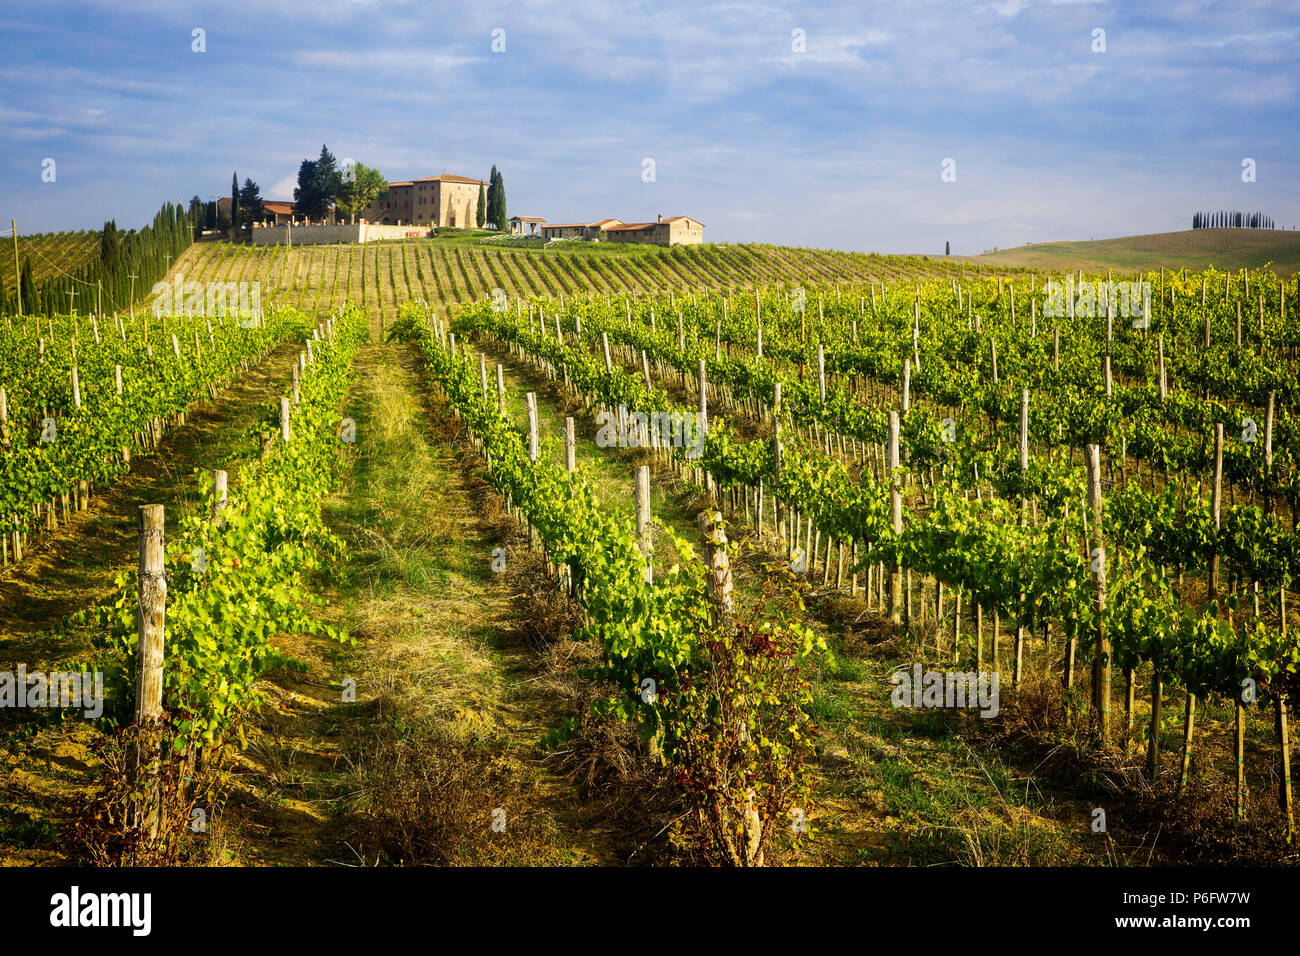 Vineyards and an estate in Chianti, Italy. Stock Photo